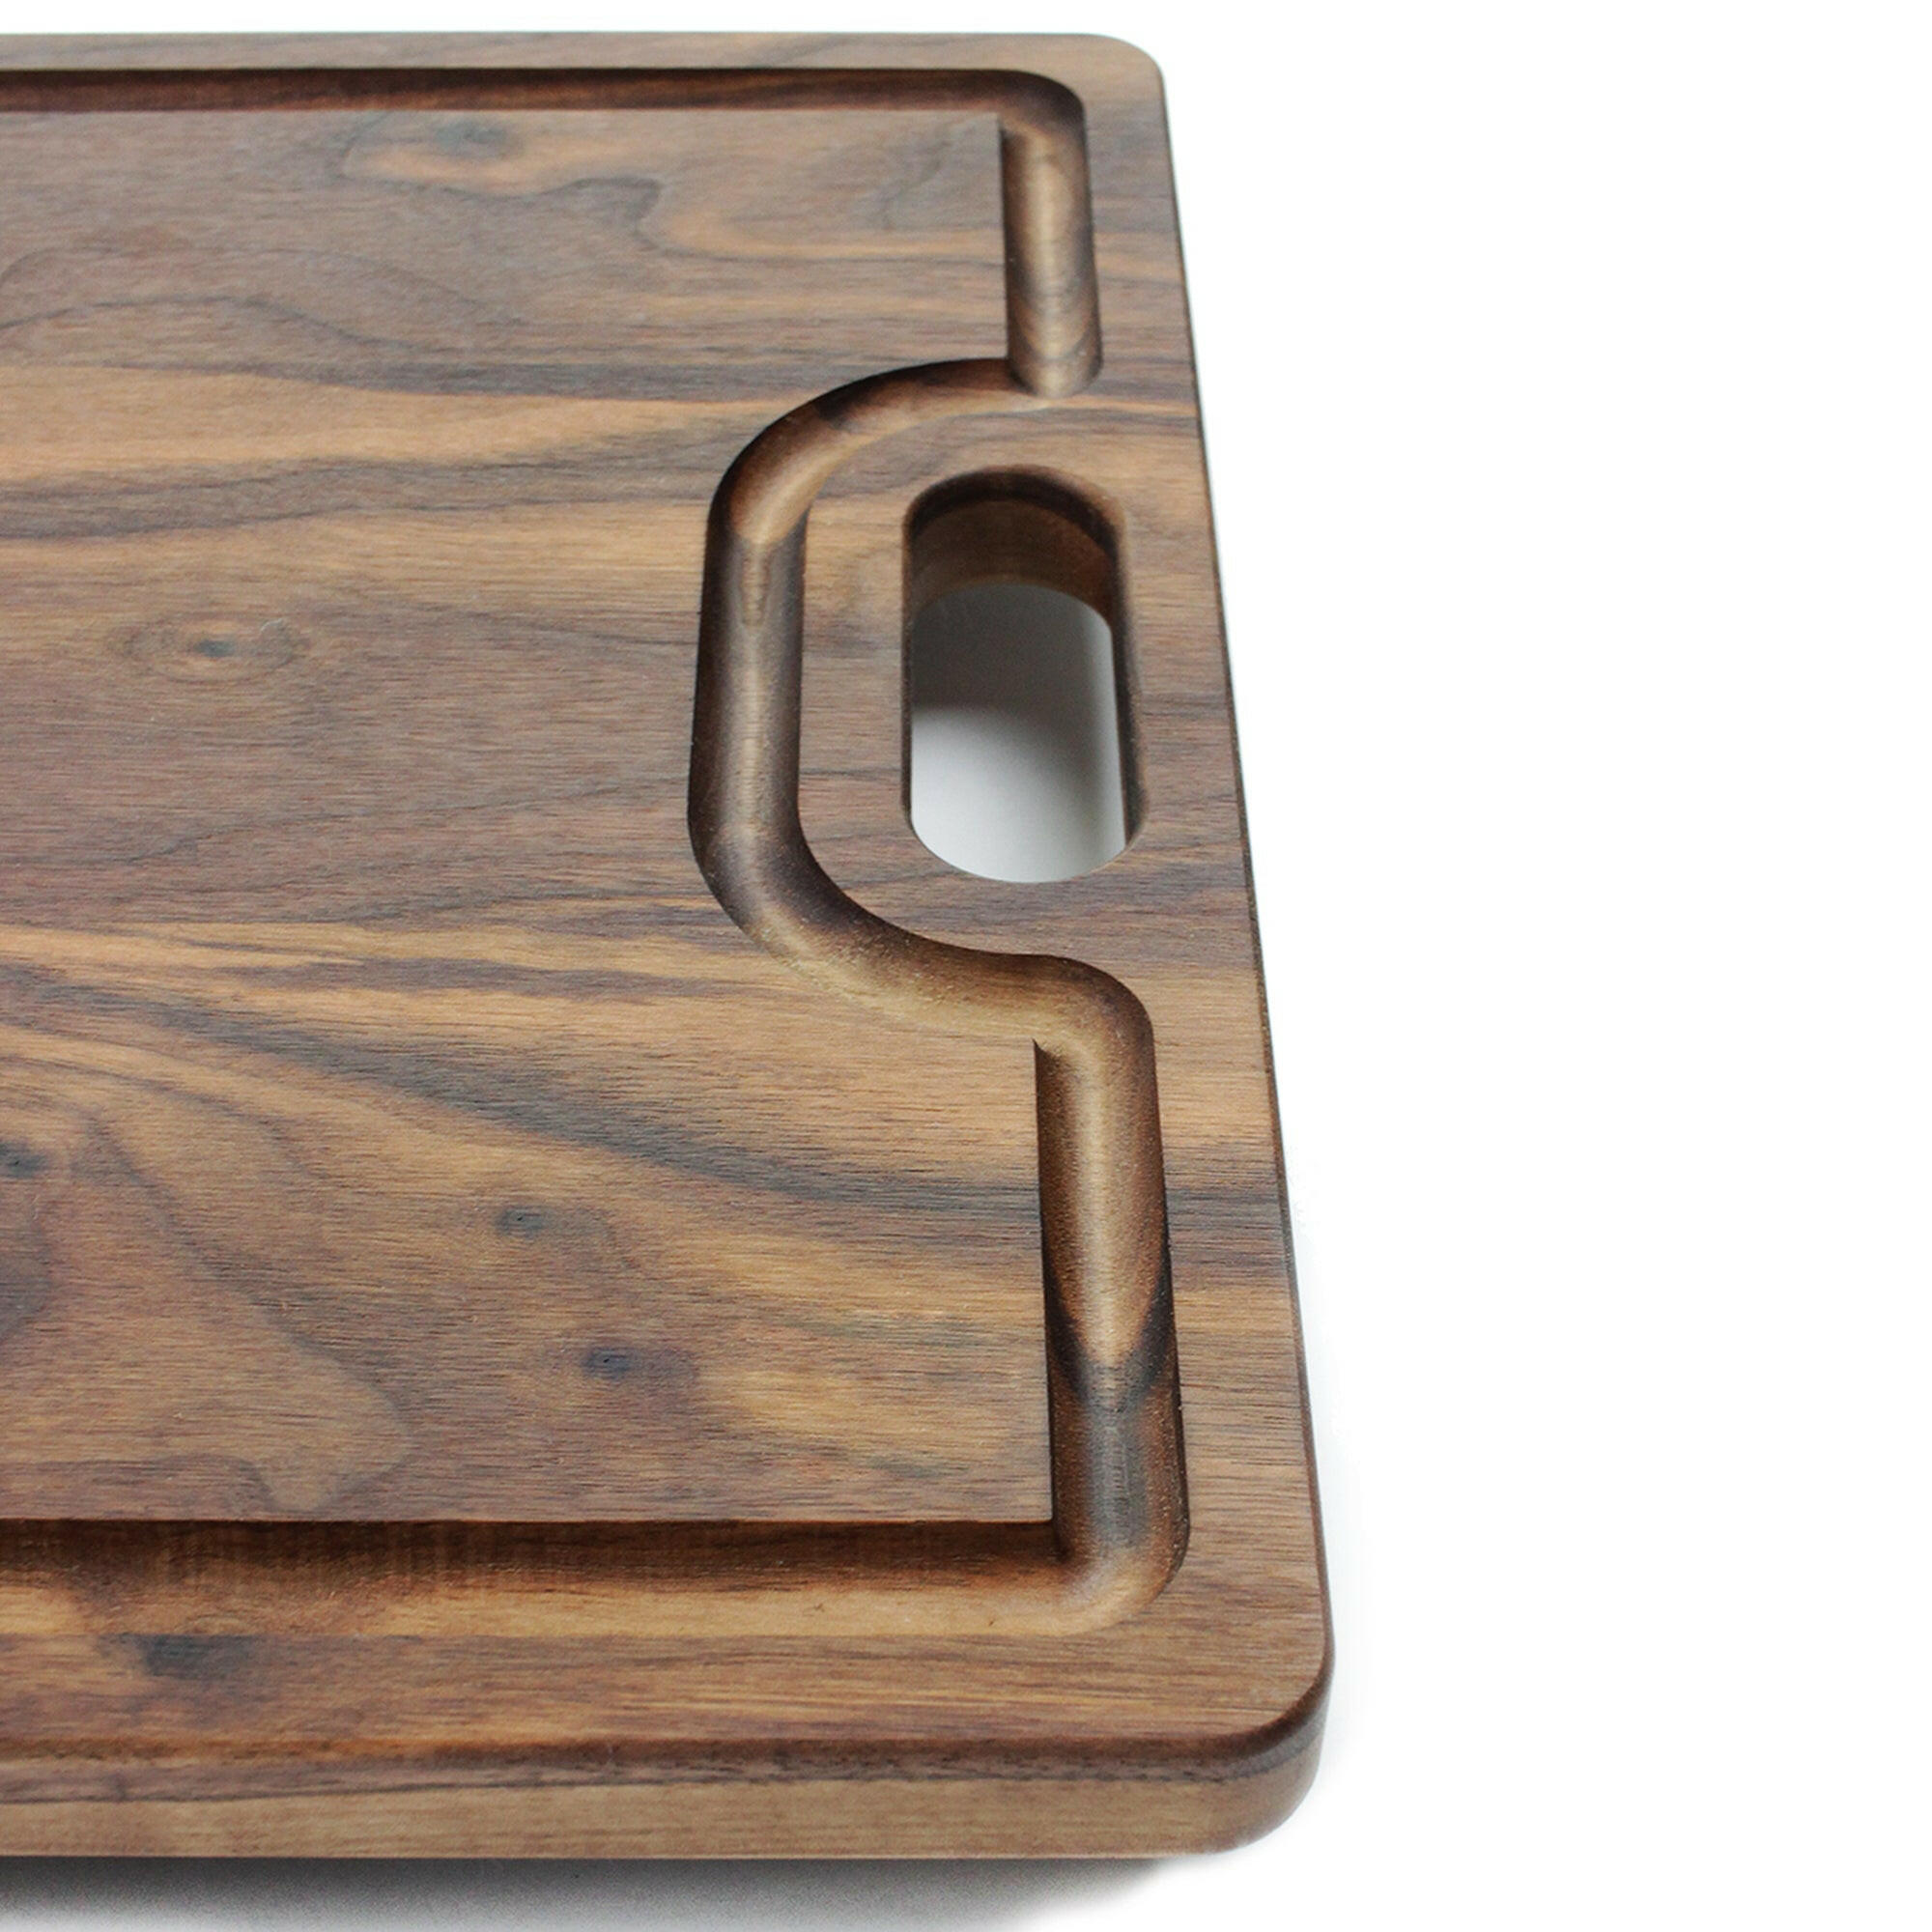 All Dark Black Walnut Cutting Board 15 x 10 with built in handles and  Rubber Feet